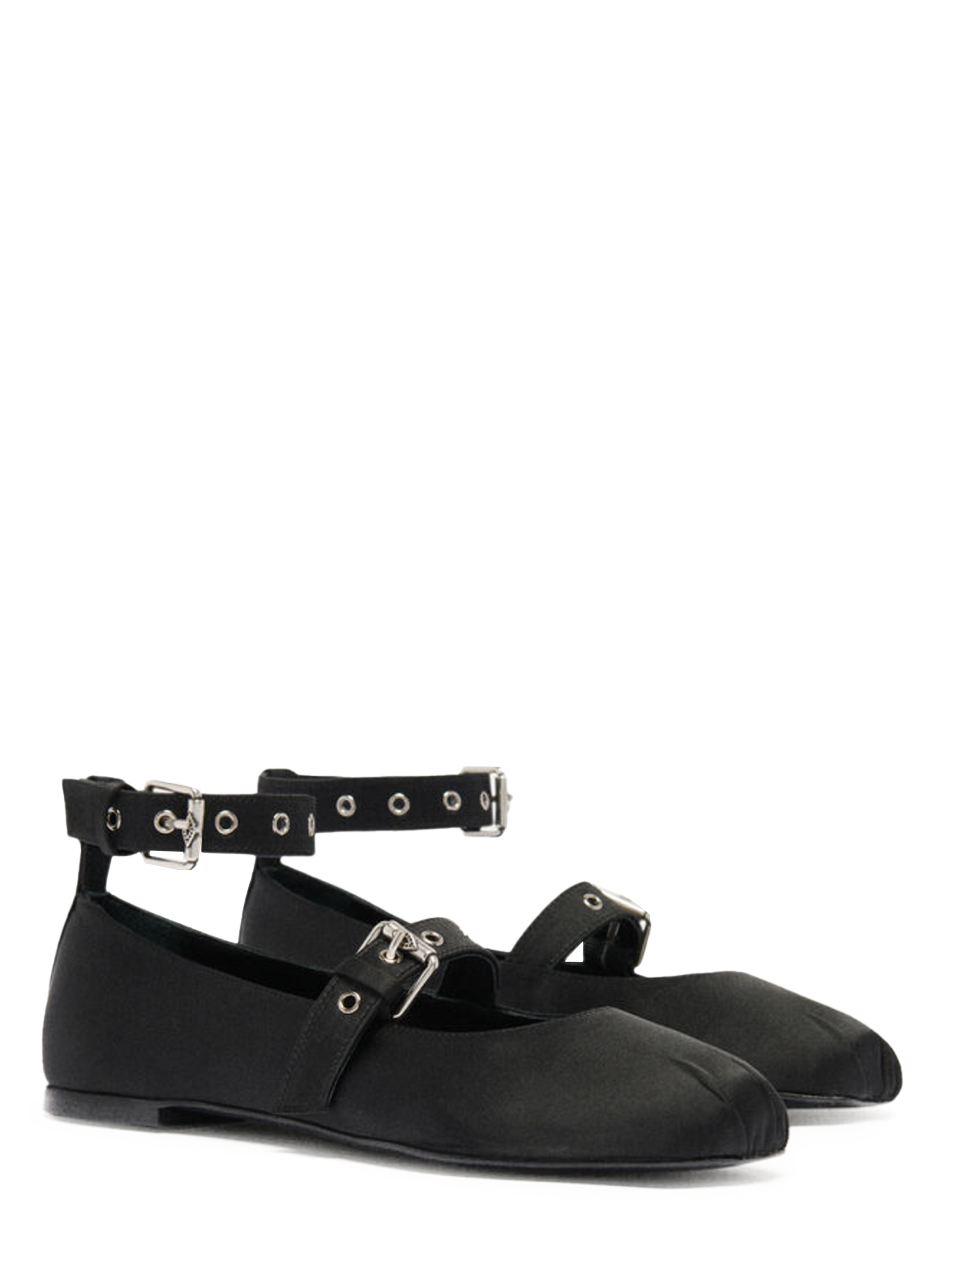 BA&SH Canya Strappy Ballet Flat in Black Front Side View 

